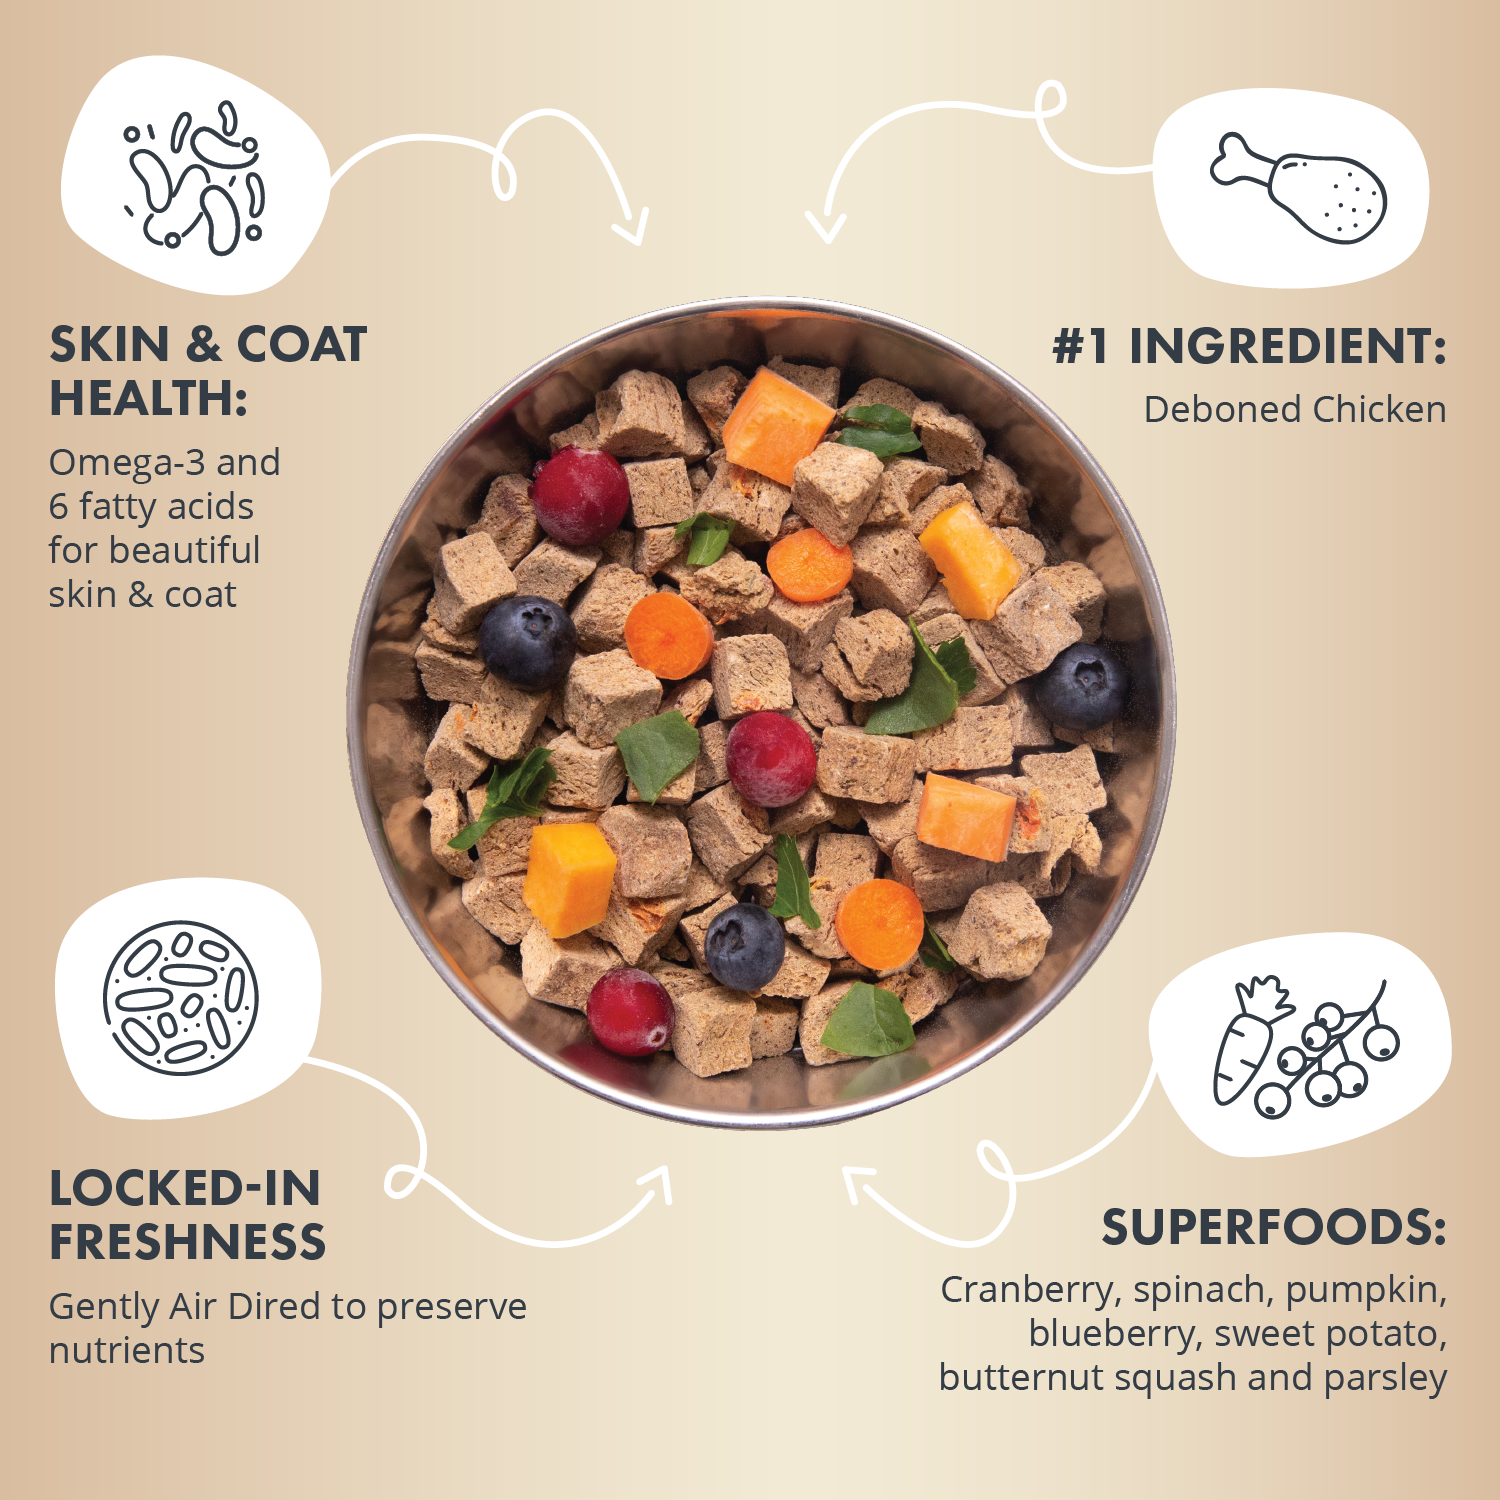 Bowl of Health Extension air-dried dog food with deboned chicken as the #1 ingredient, enriched with superfoods like cranberry and spinach, and omega fatty acids for skin and coat health, highlighting the locked-in freshness and nutrient preservation.